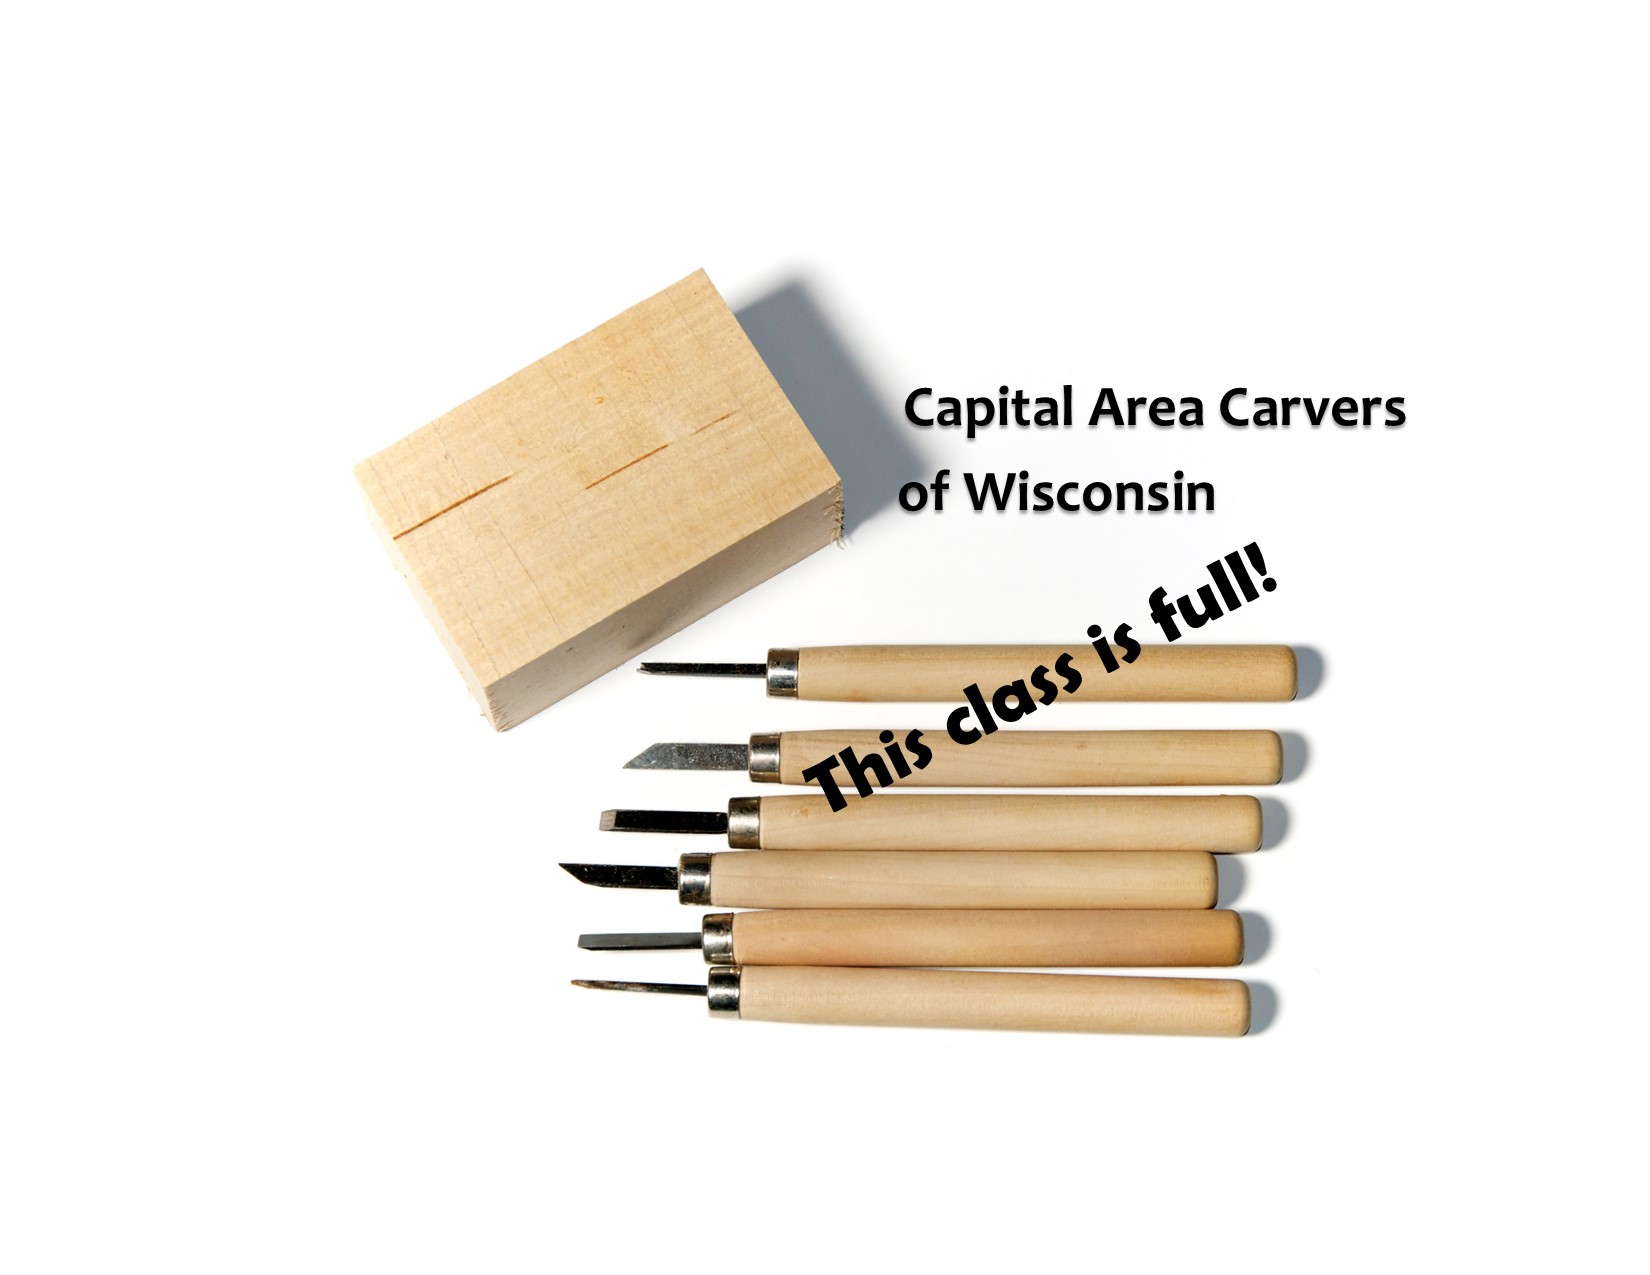 The name Capital Area Carvers of Wisconsin with a set of woodcarving tools